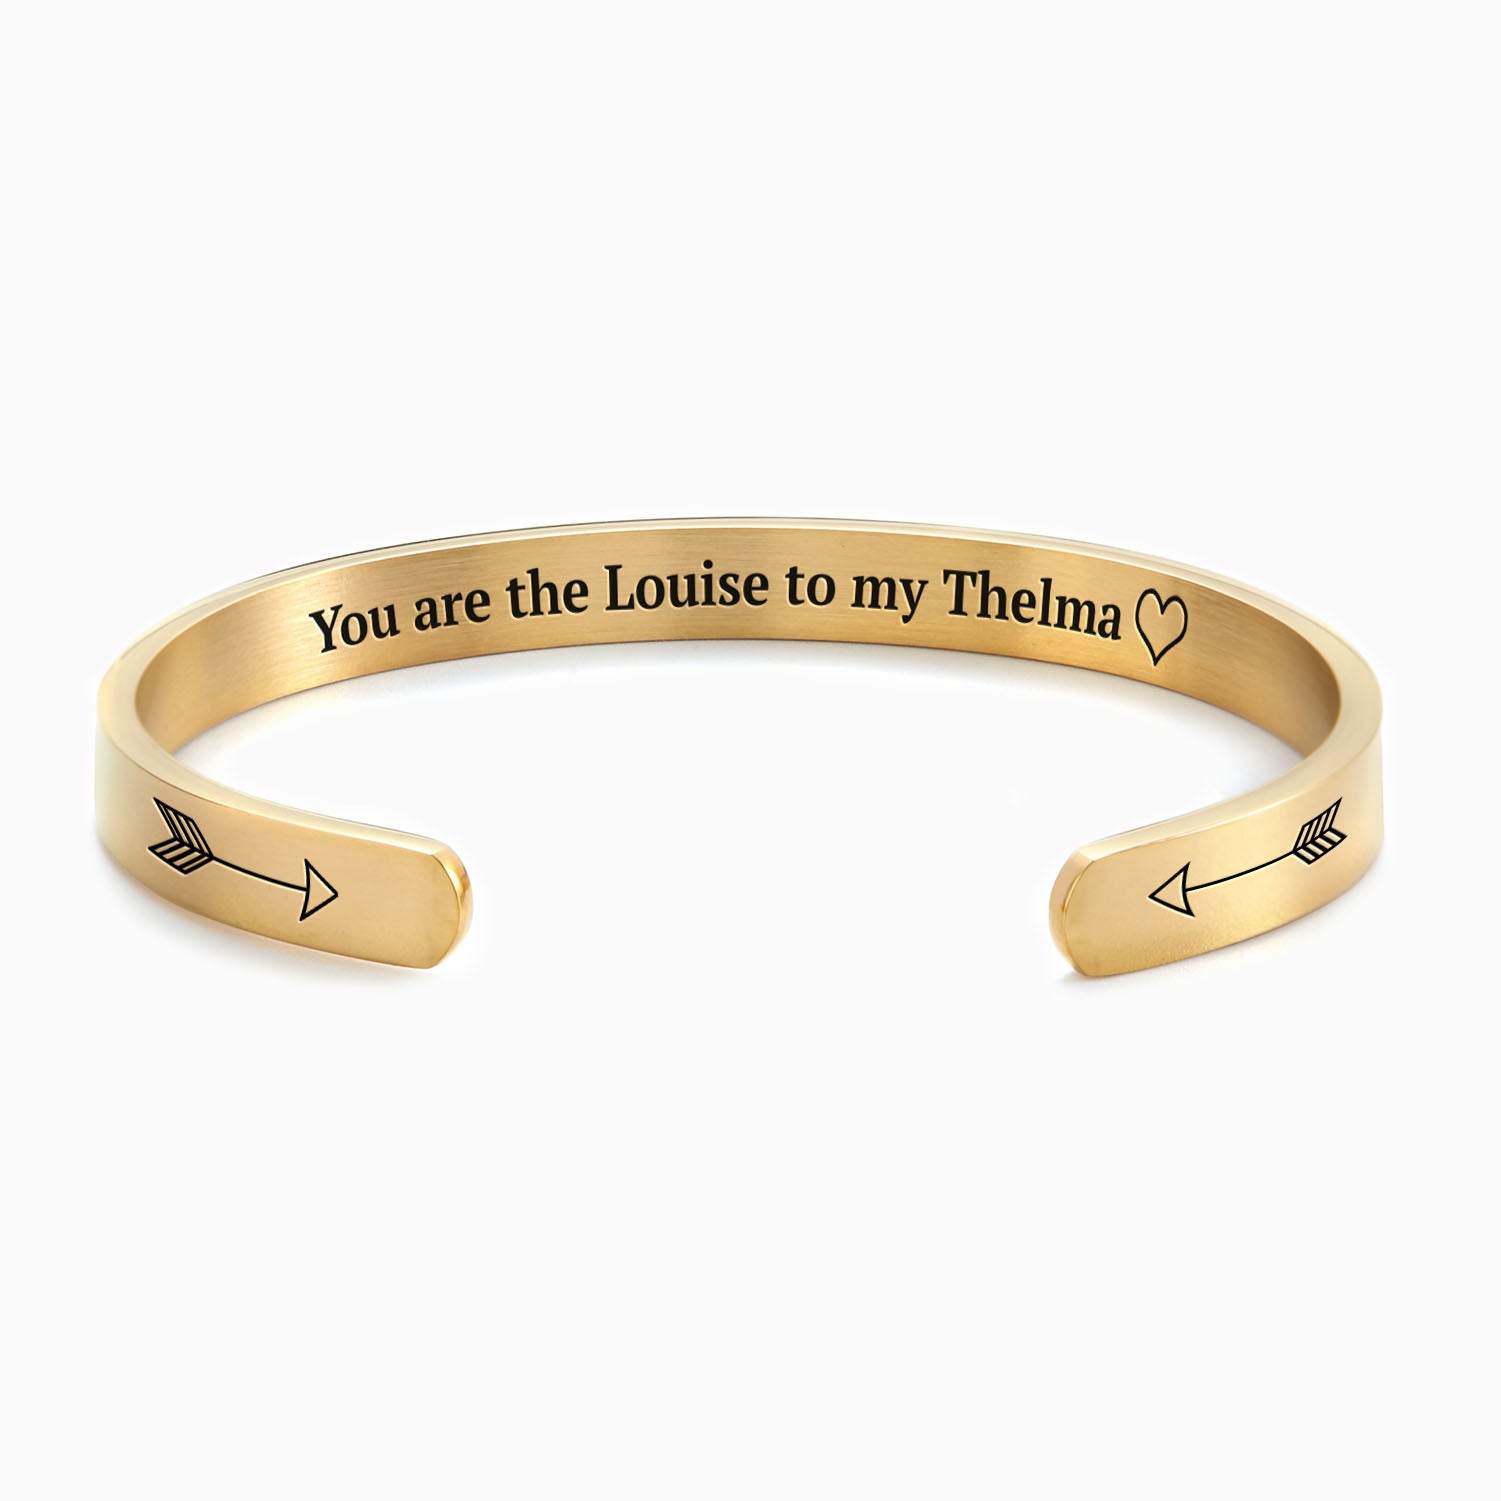 Mint & Lily You Are The Thelma to My Louise Personalizable Cuff